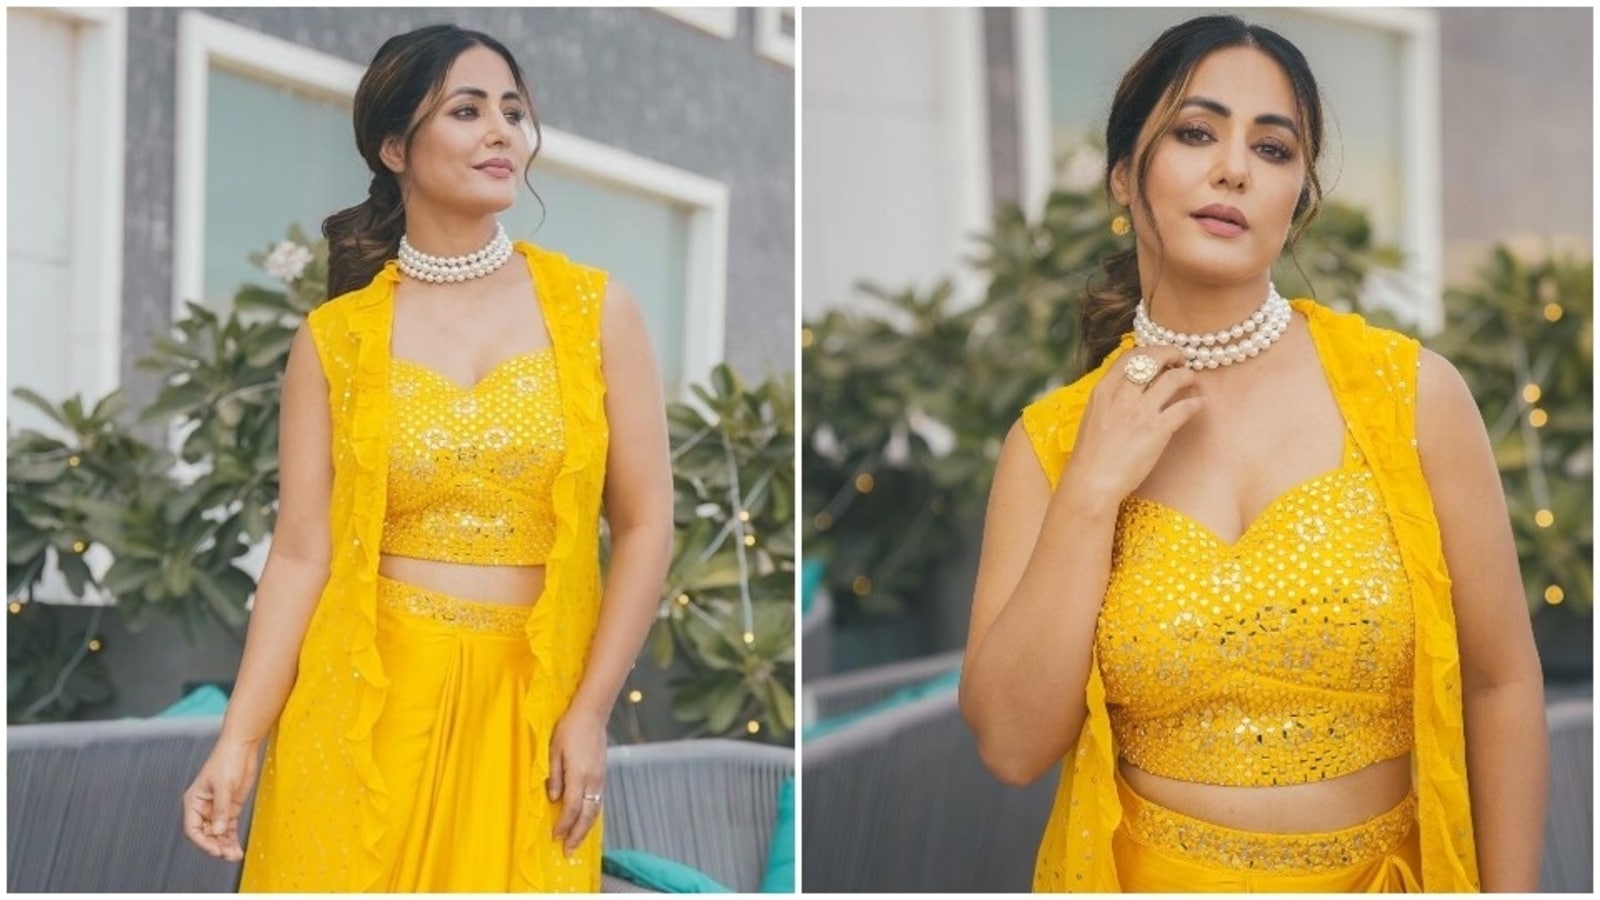 hina-khan-serves-karwa-chauth-wardrobe-fix-for-new-brides-in-traditional-yellow-outfit-and-pearl-necklace-see-pics